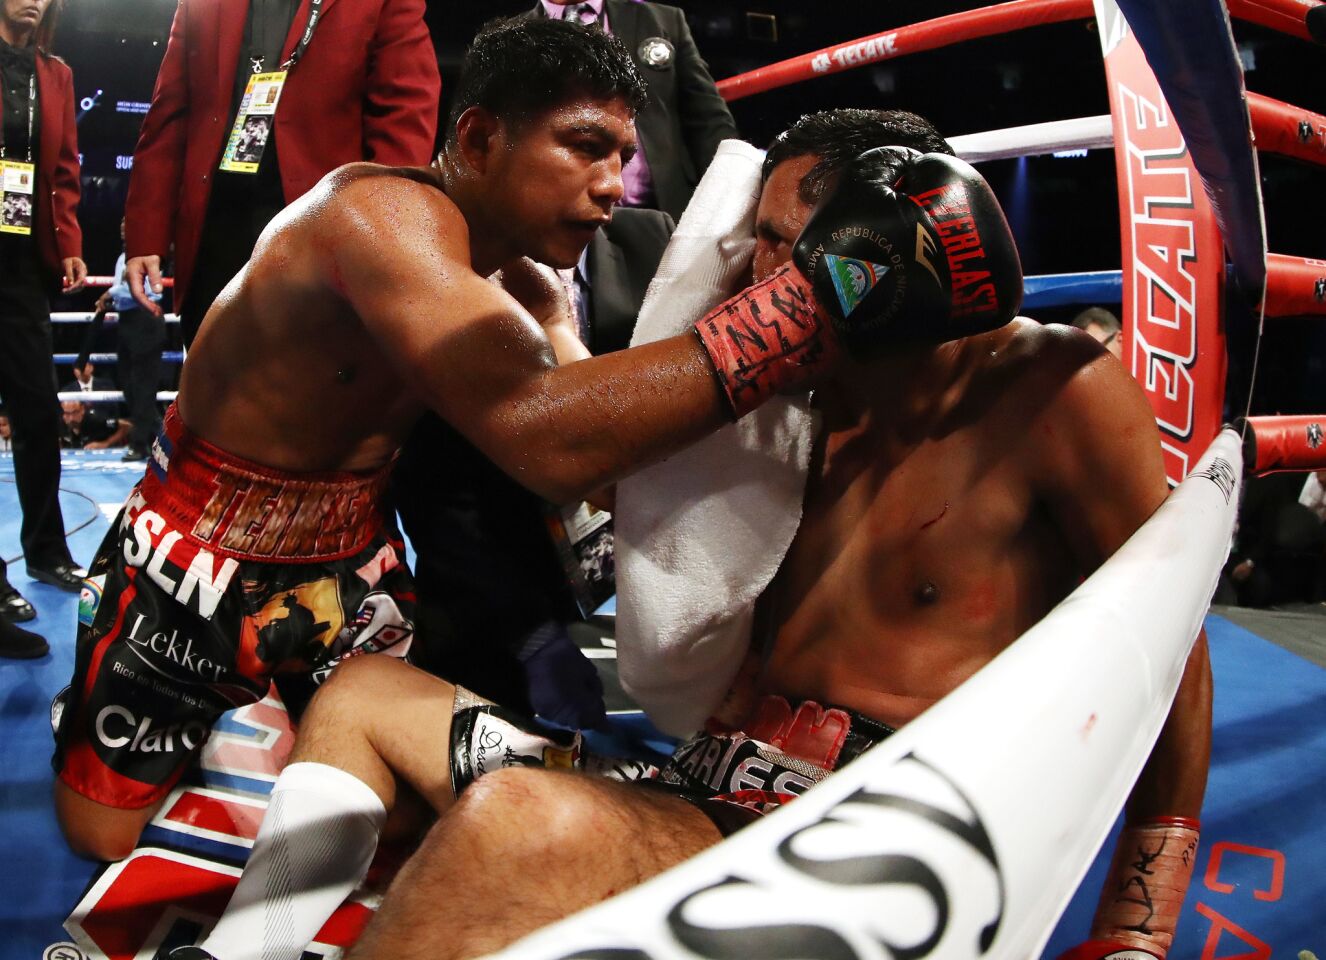 Roman Gonzalez consoles Moises Fuentes after knocking him out in the first round during their super flyweight bout at T-Mobile Arena on September 15, 2018 in Las Vegas, Nevada.